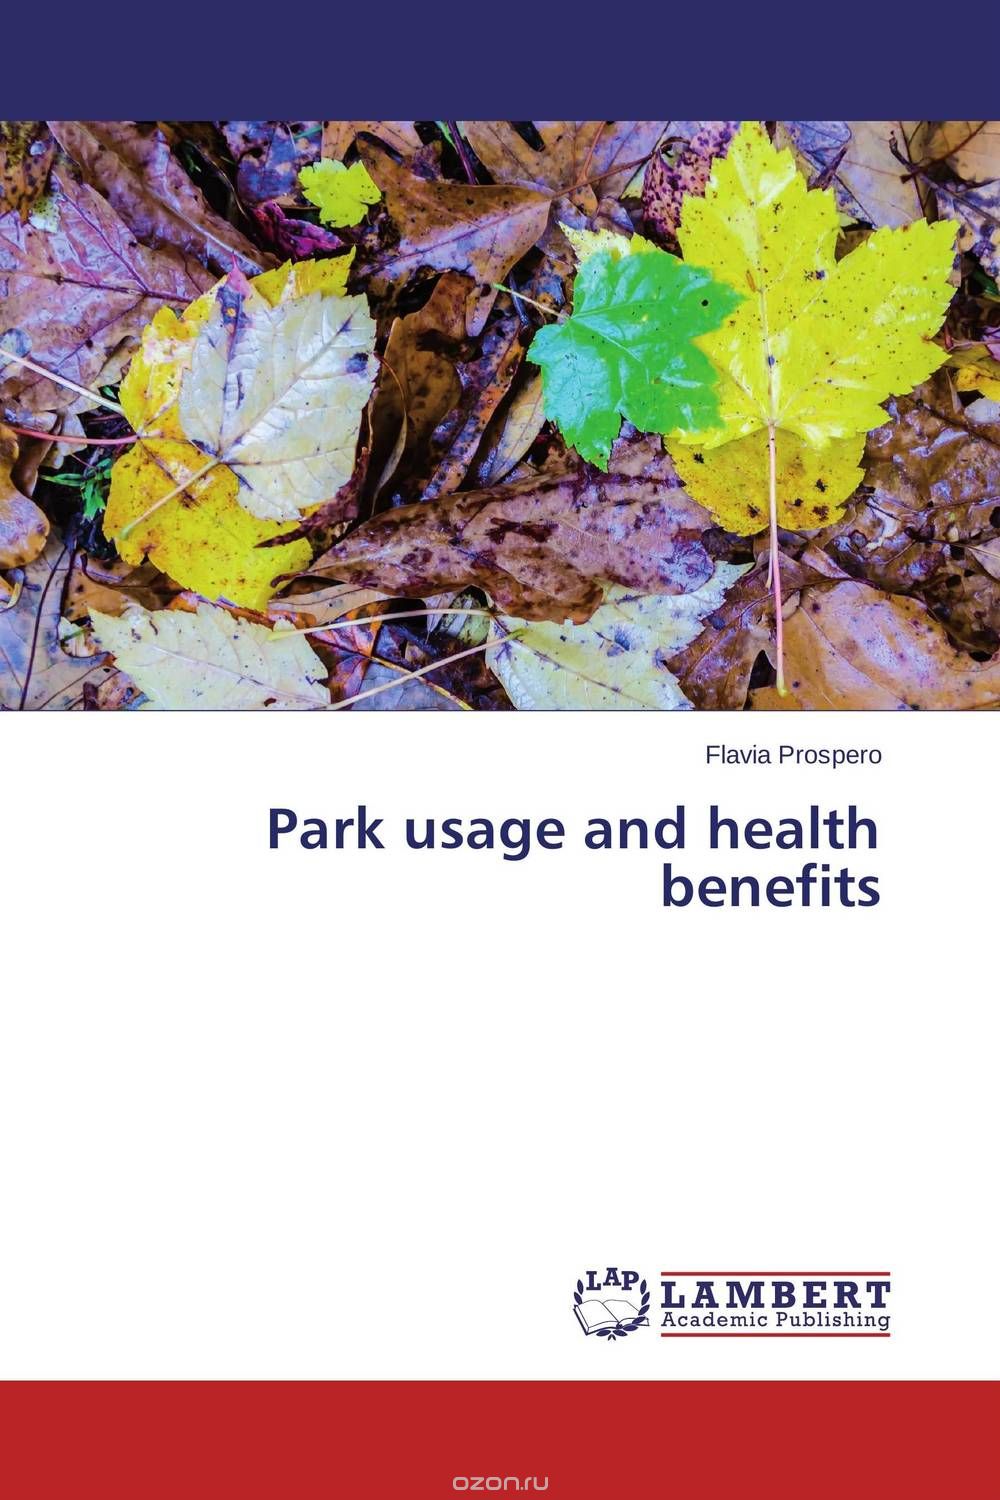 Park usage and health benefits